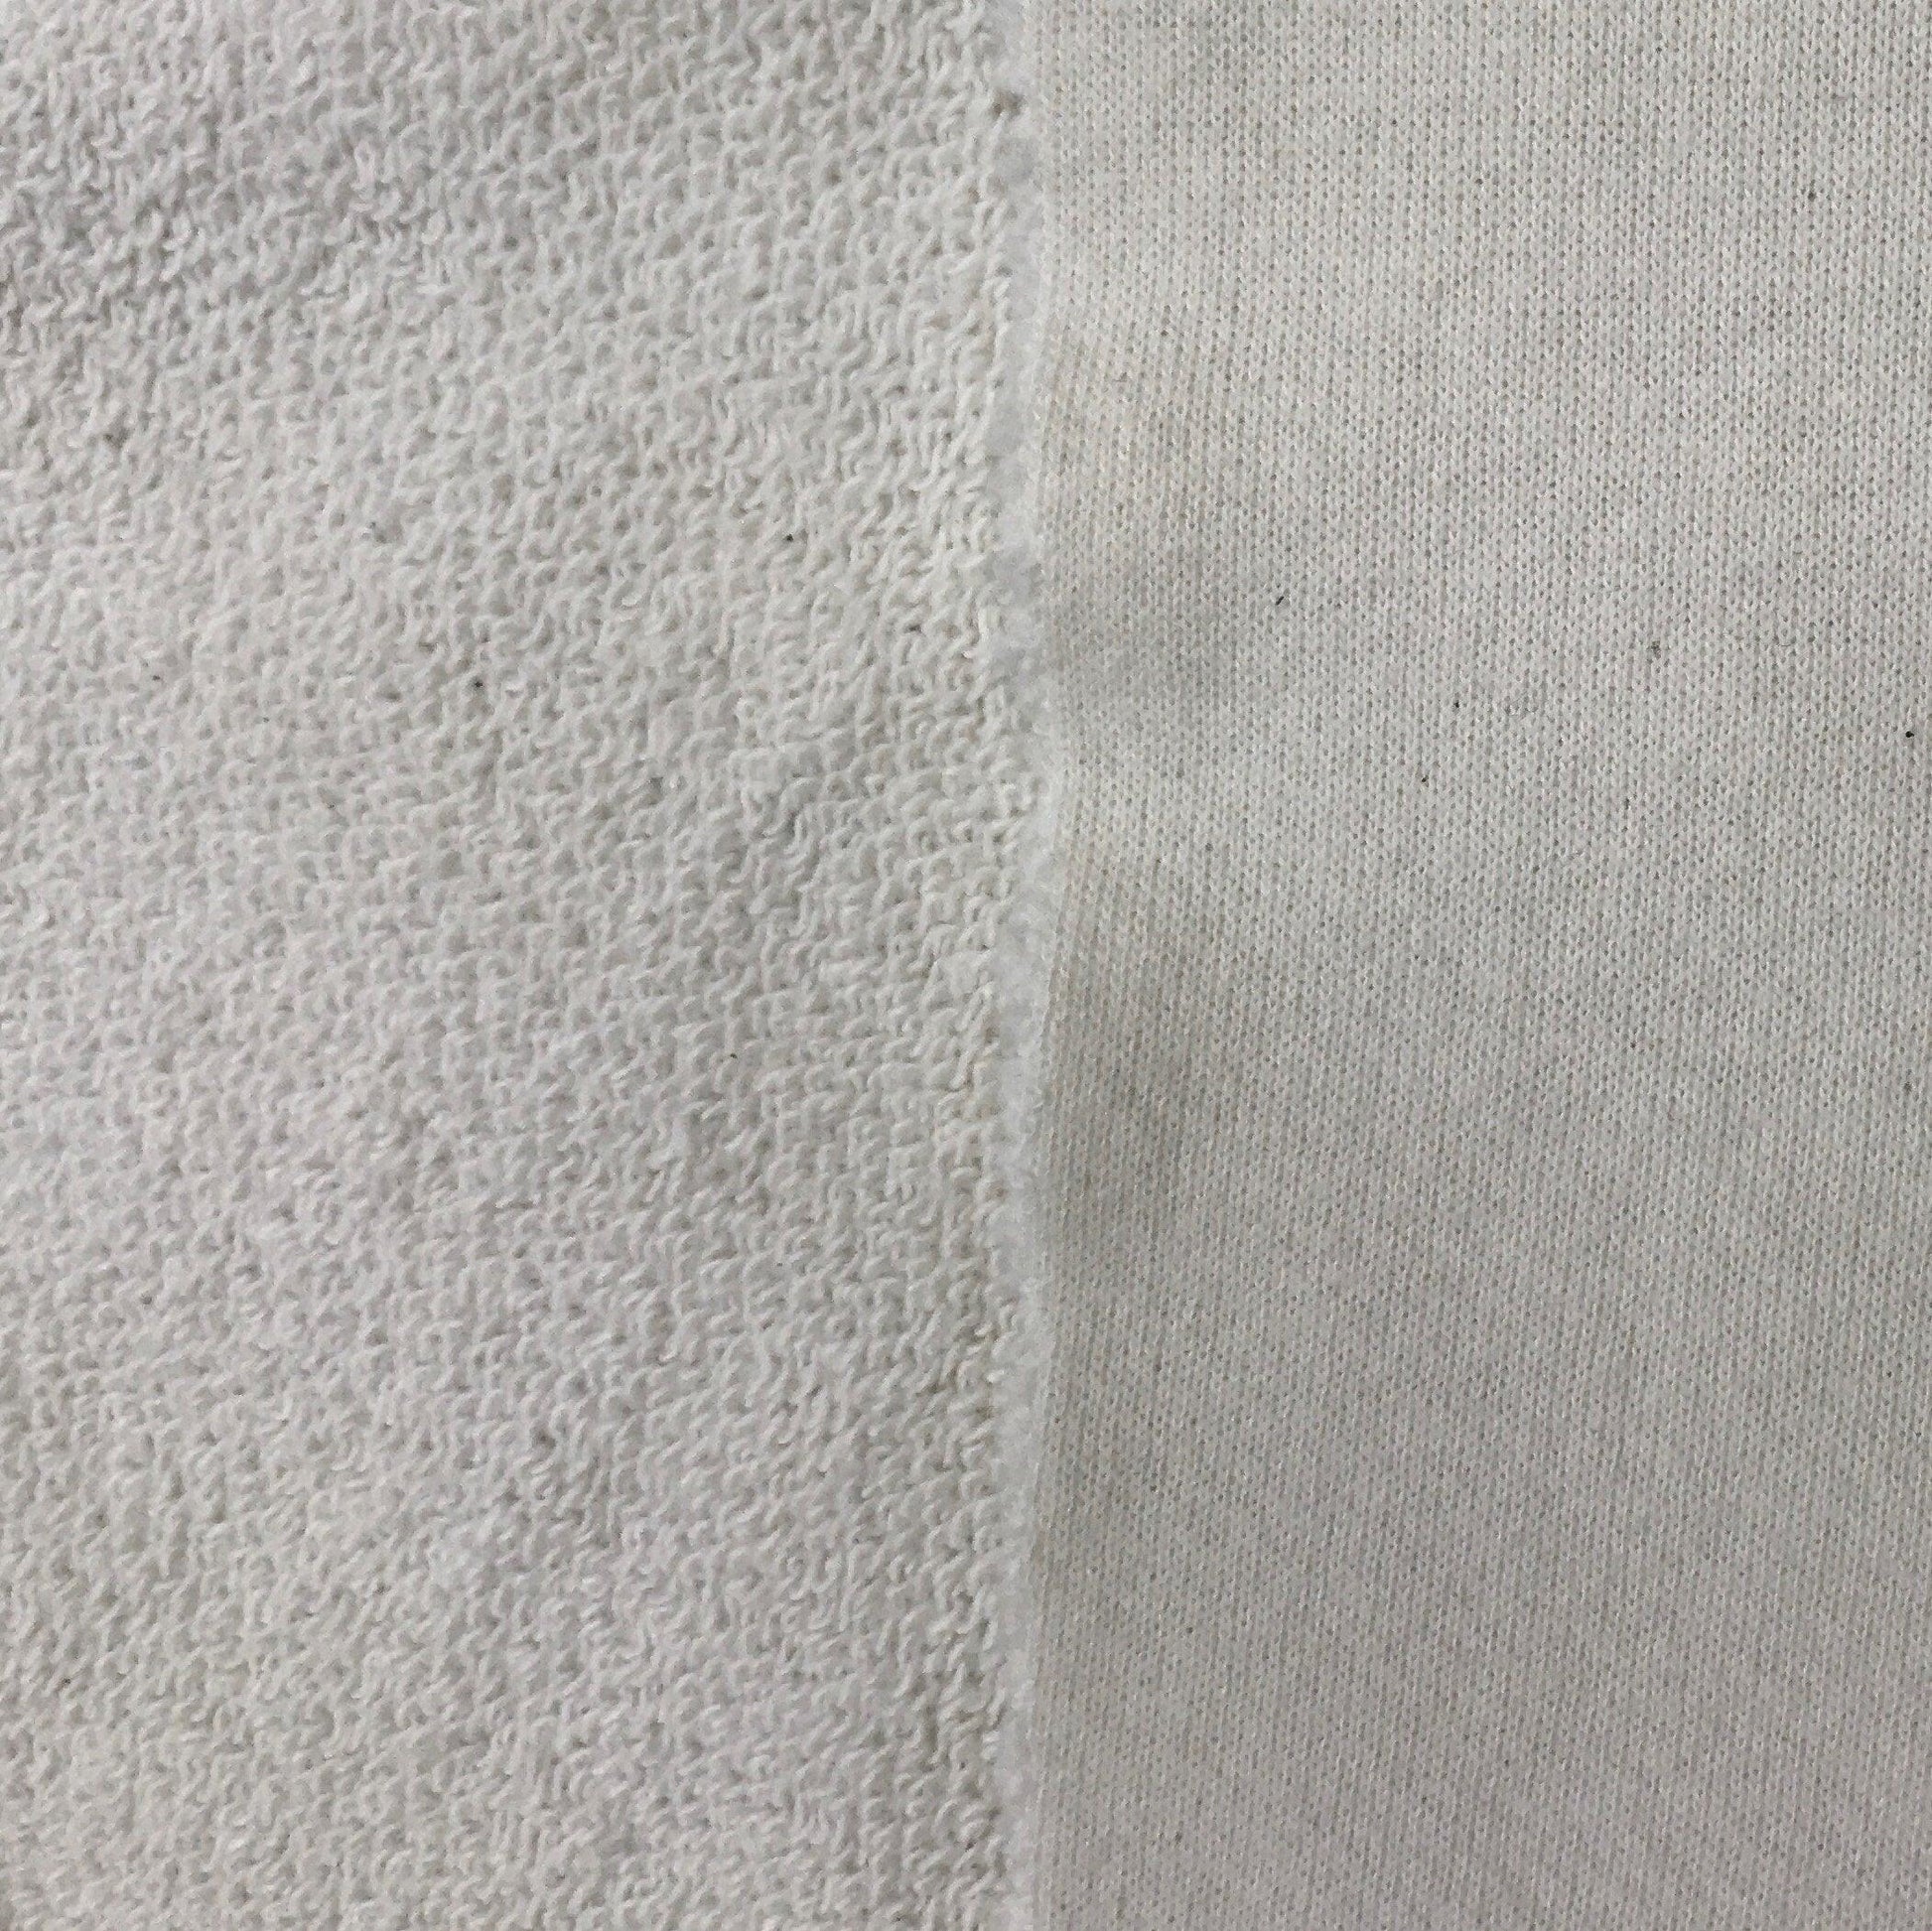 Natural Heavy Organic Cotton French Terry Fabric - Grown in the USA,  $16.50/yd - Rolls